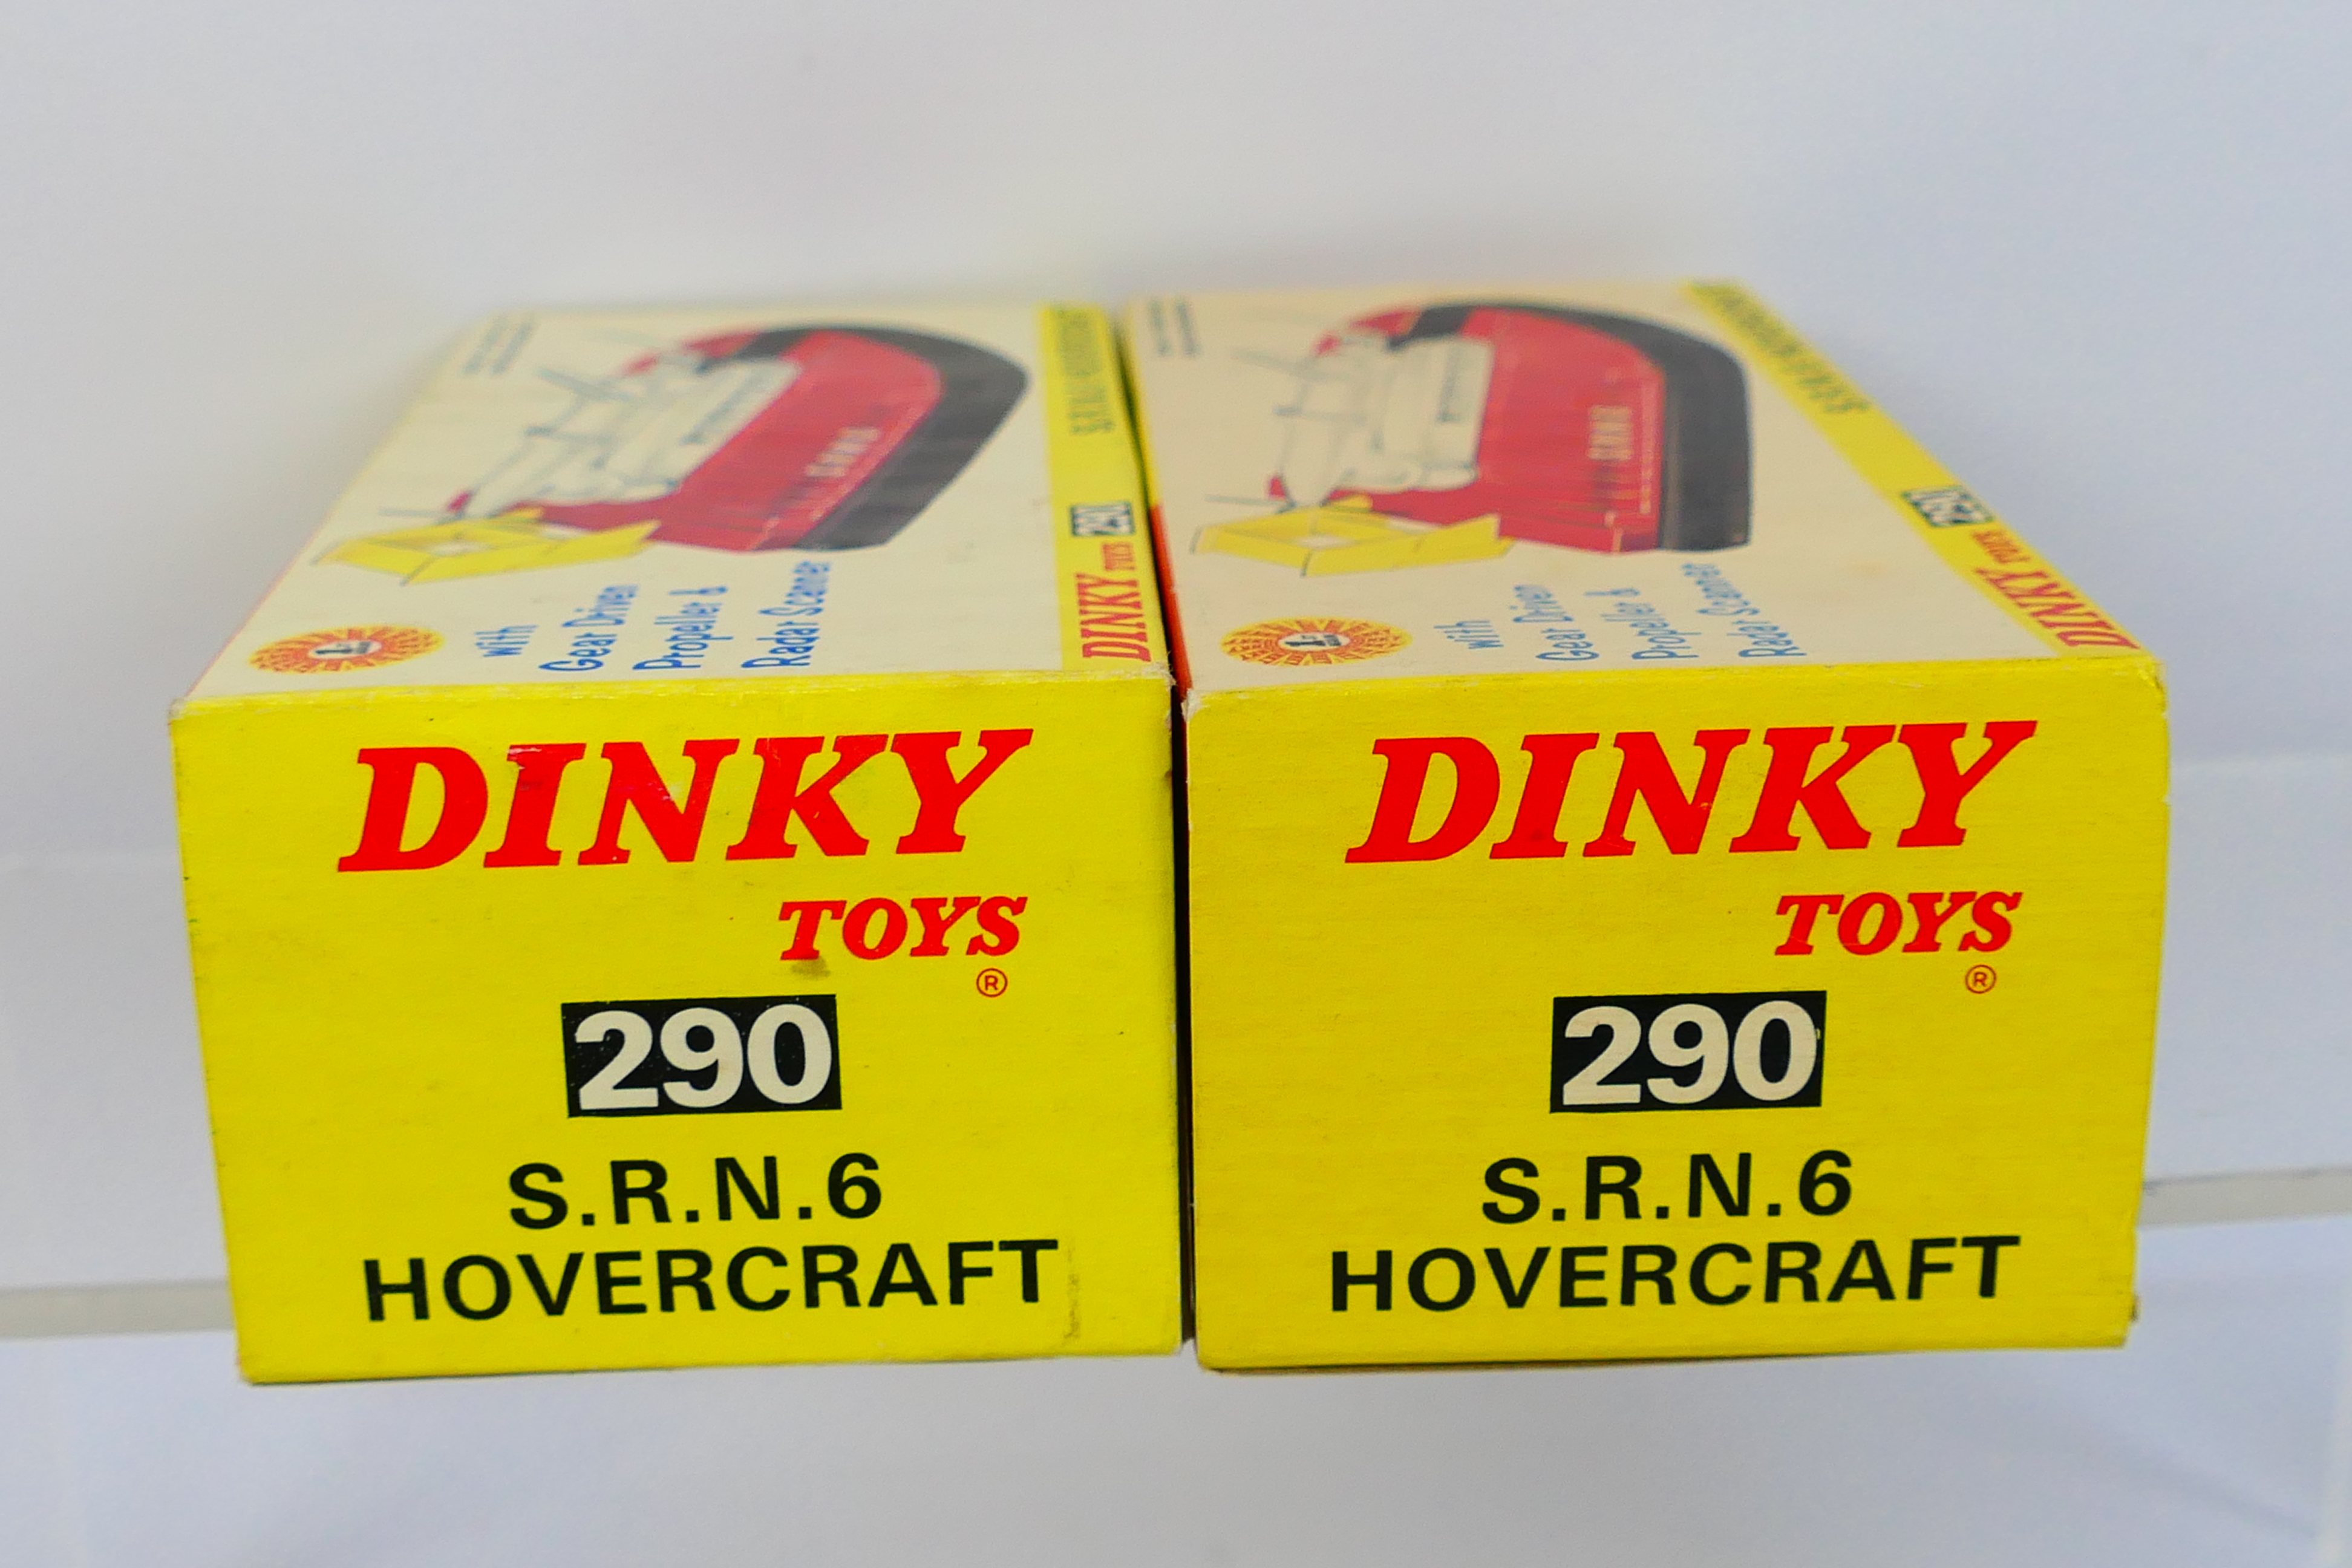 Dinky - 2 x boxed S.R.N.6 hovercraft models # 290. - Image 11 of 11